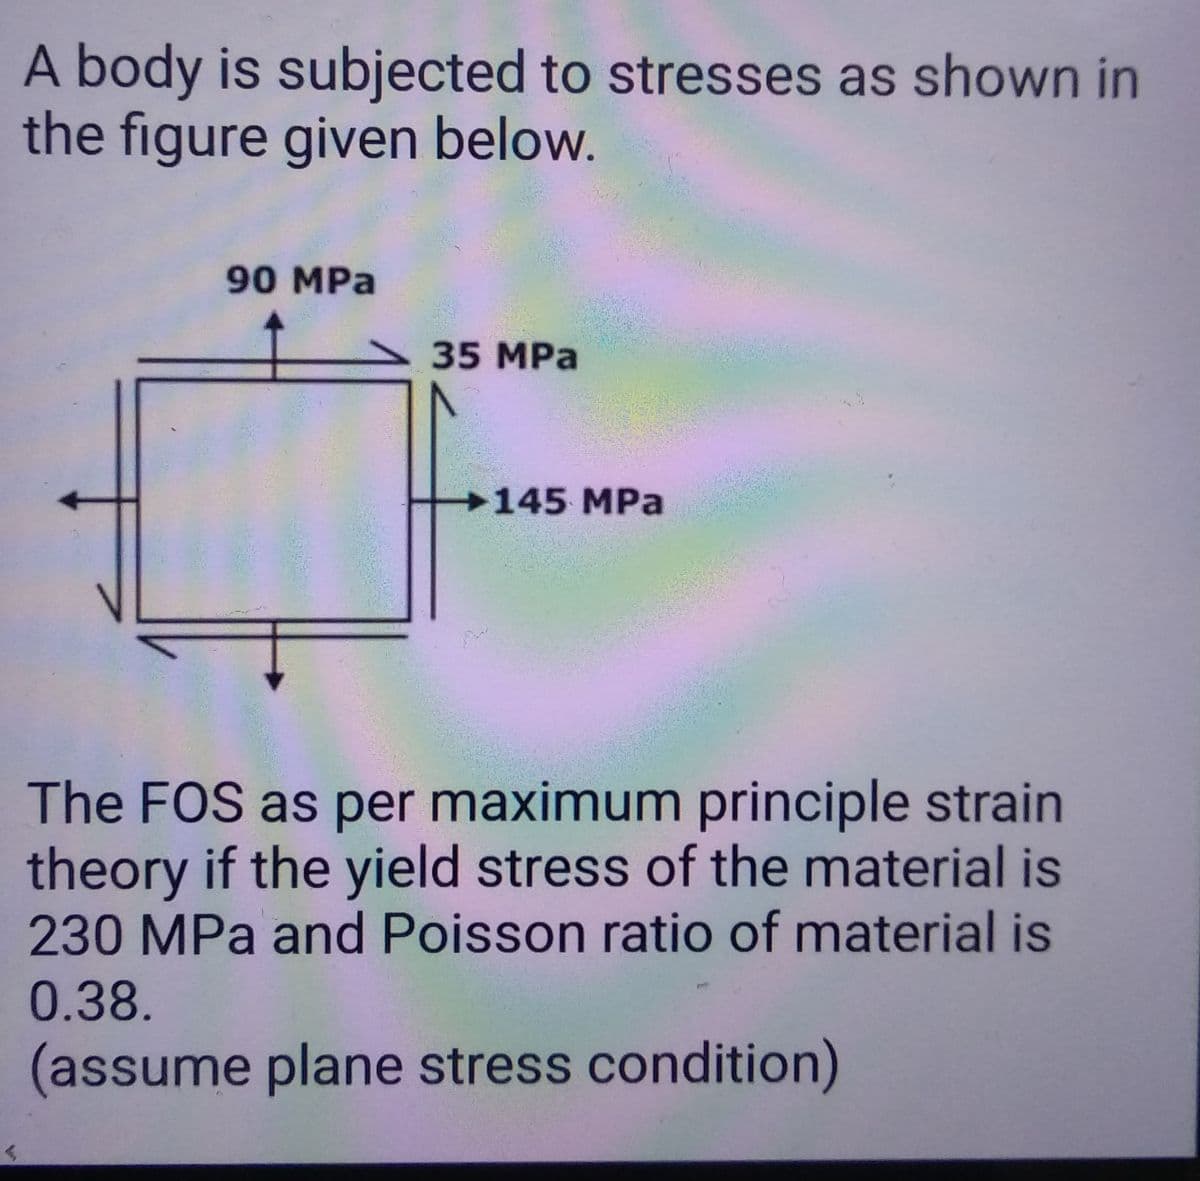 A body is subjected to stresses as shown in
the figure given below.
90 MPa
35 MPa
145 MPa
The FOS as per maximum principle strain
theory if the yield stress of the material is
230 MPa and Poisson ratio of material is
0.38.
(assume plane stress condition)